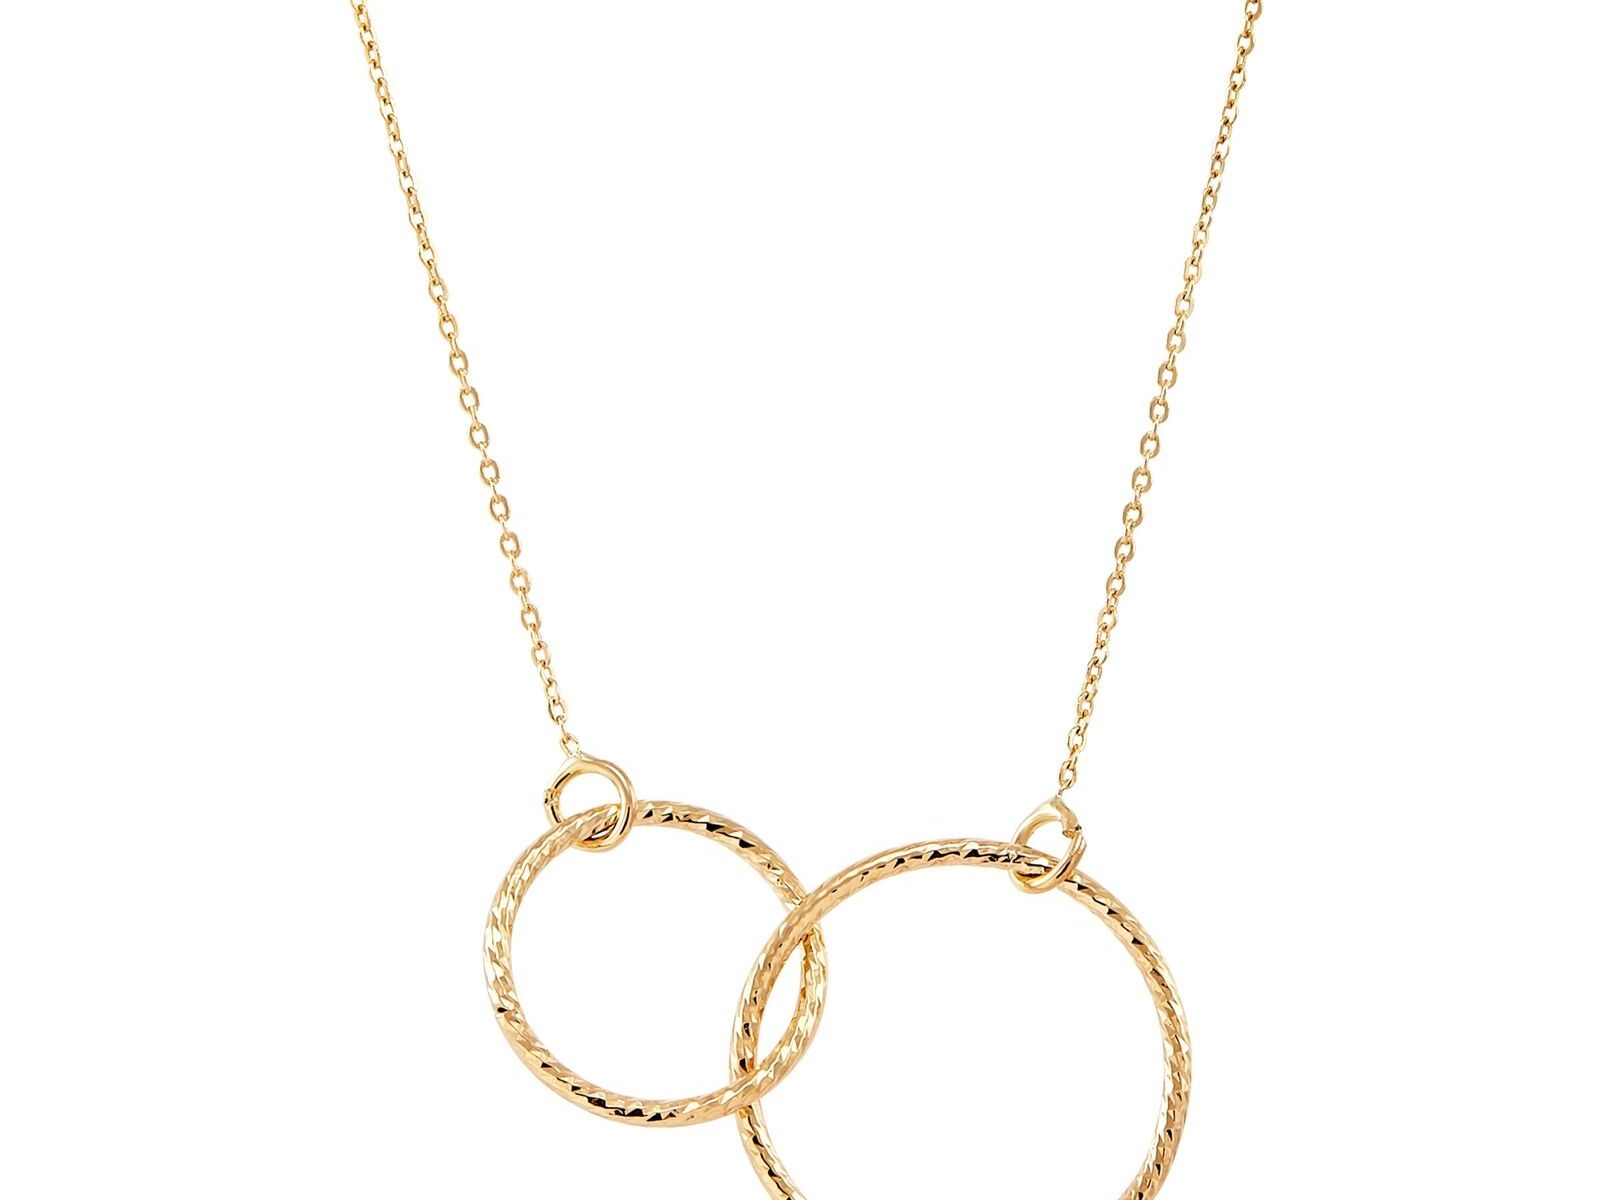 Interlocking Textured Double Circle Necklace in 14K Gold, 17"